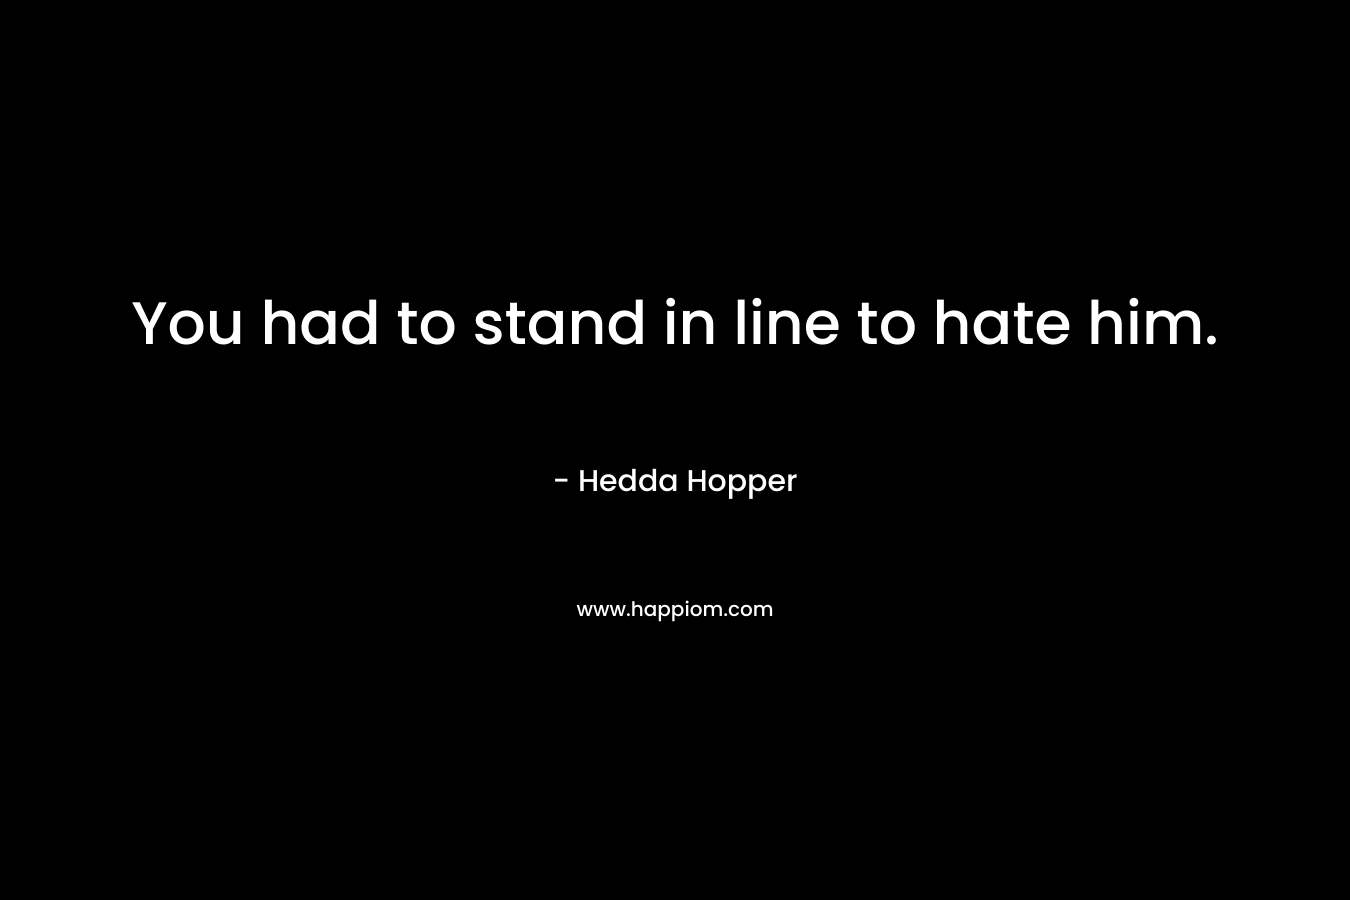 You had to stand in line to hate him. – Hedda Hopper